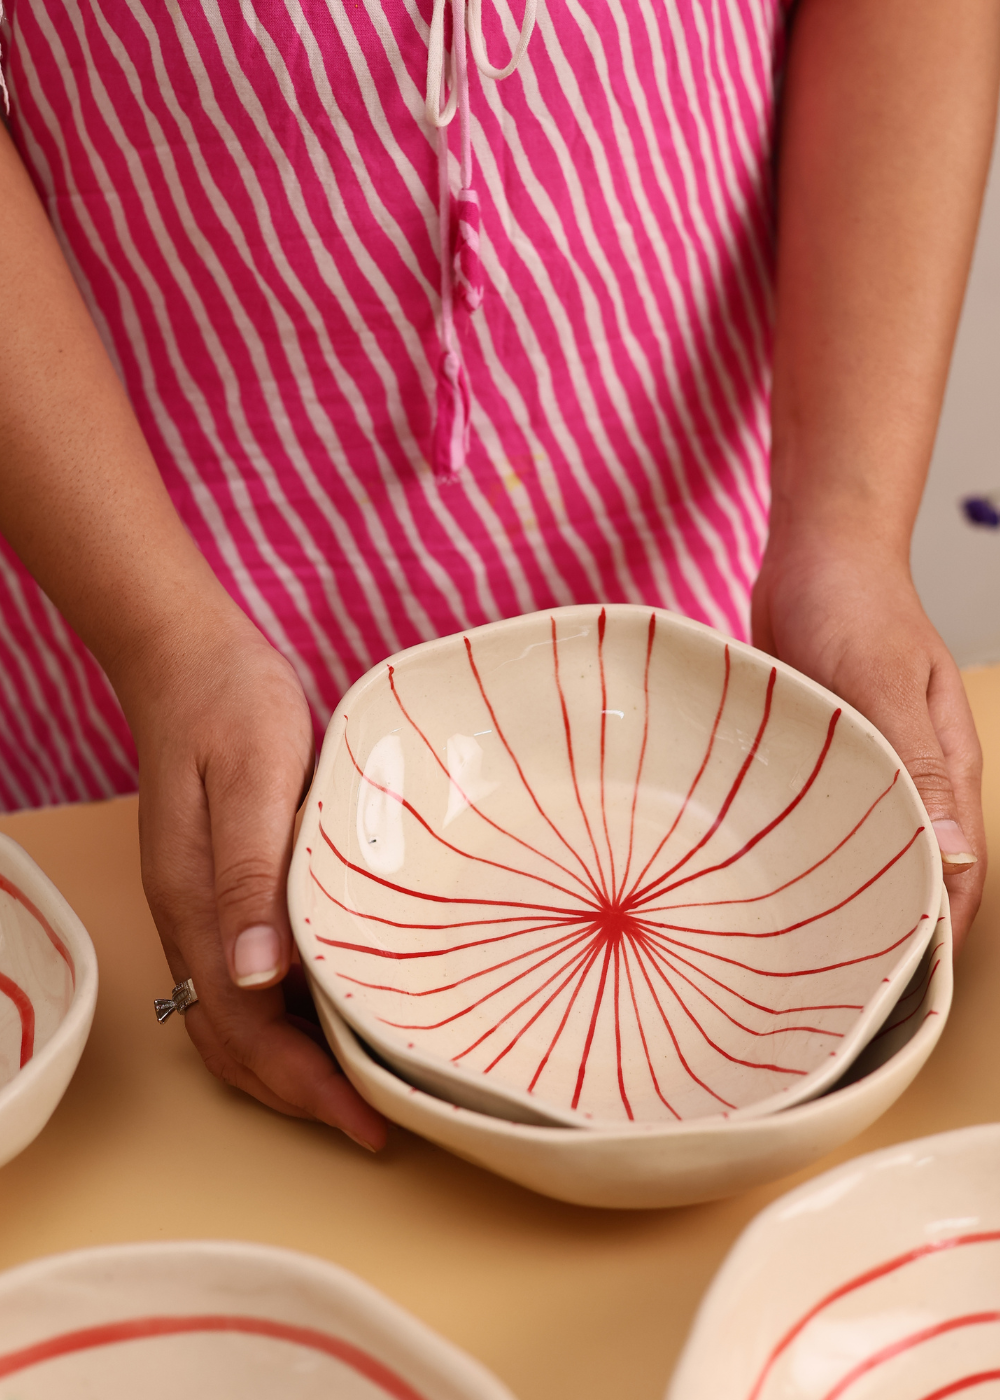 White bowl with red lines design 